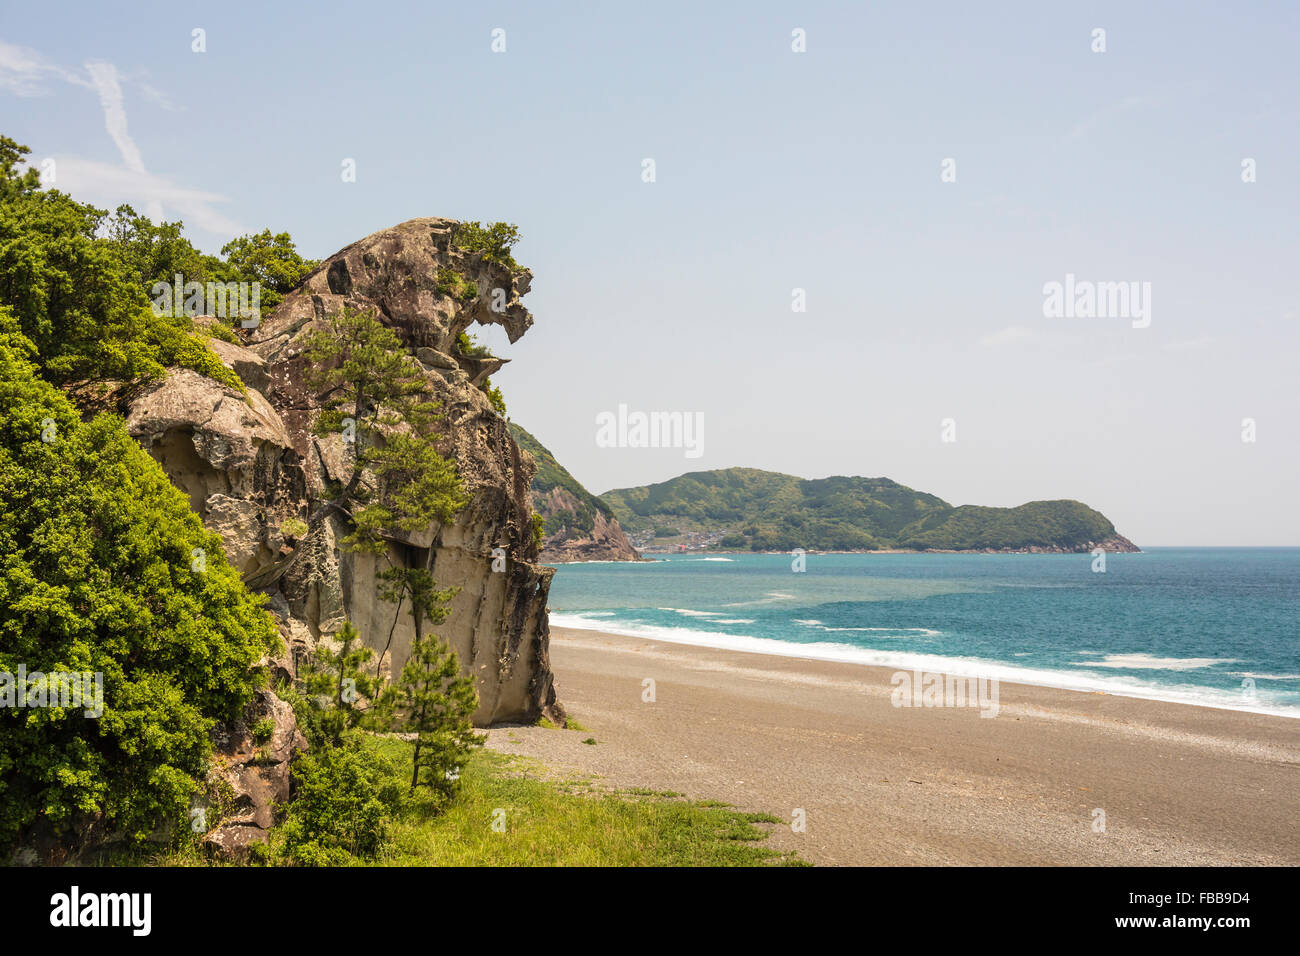 Lion rock and beach in Mie,Japan Stock Photo